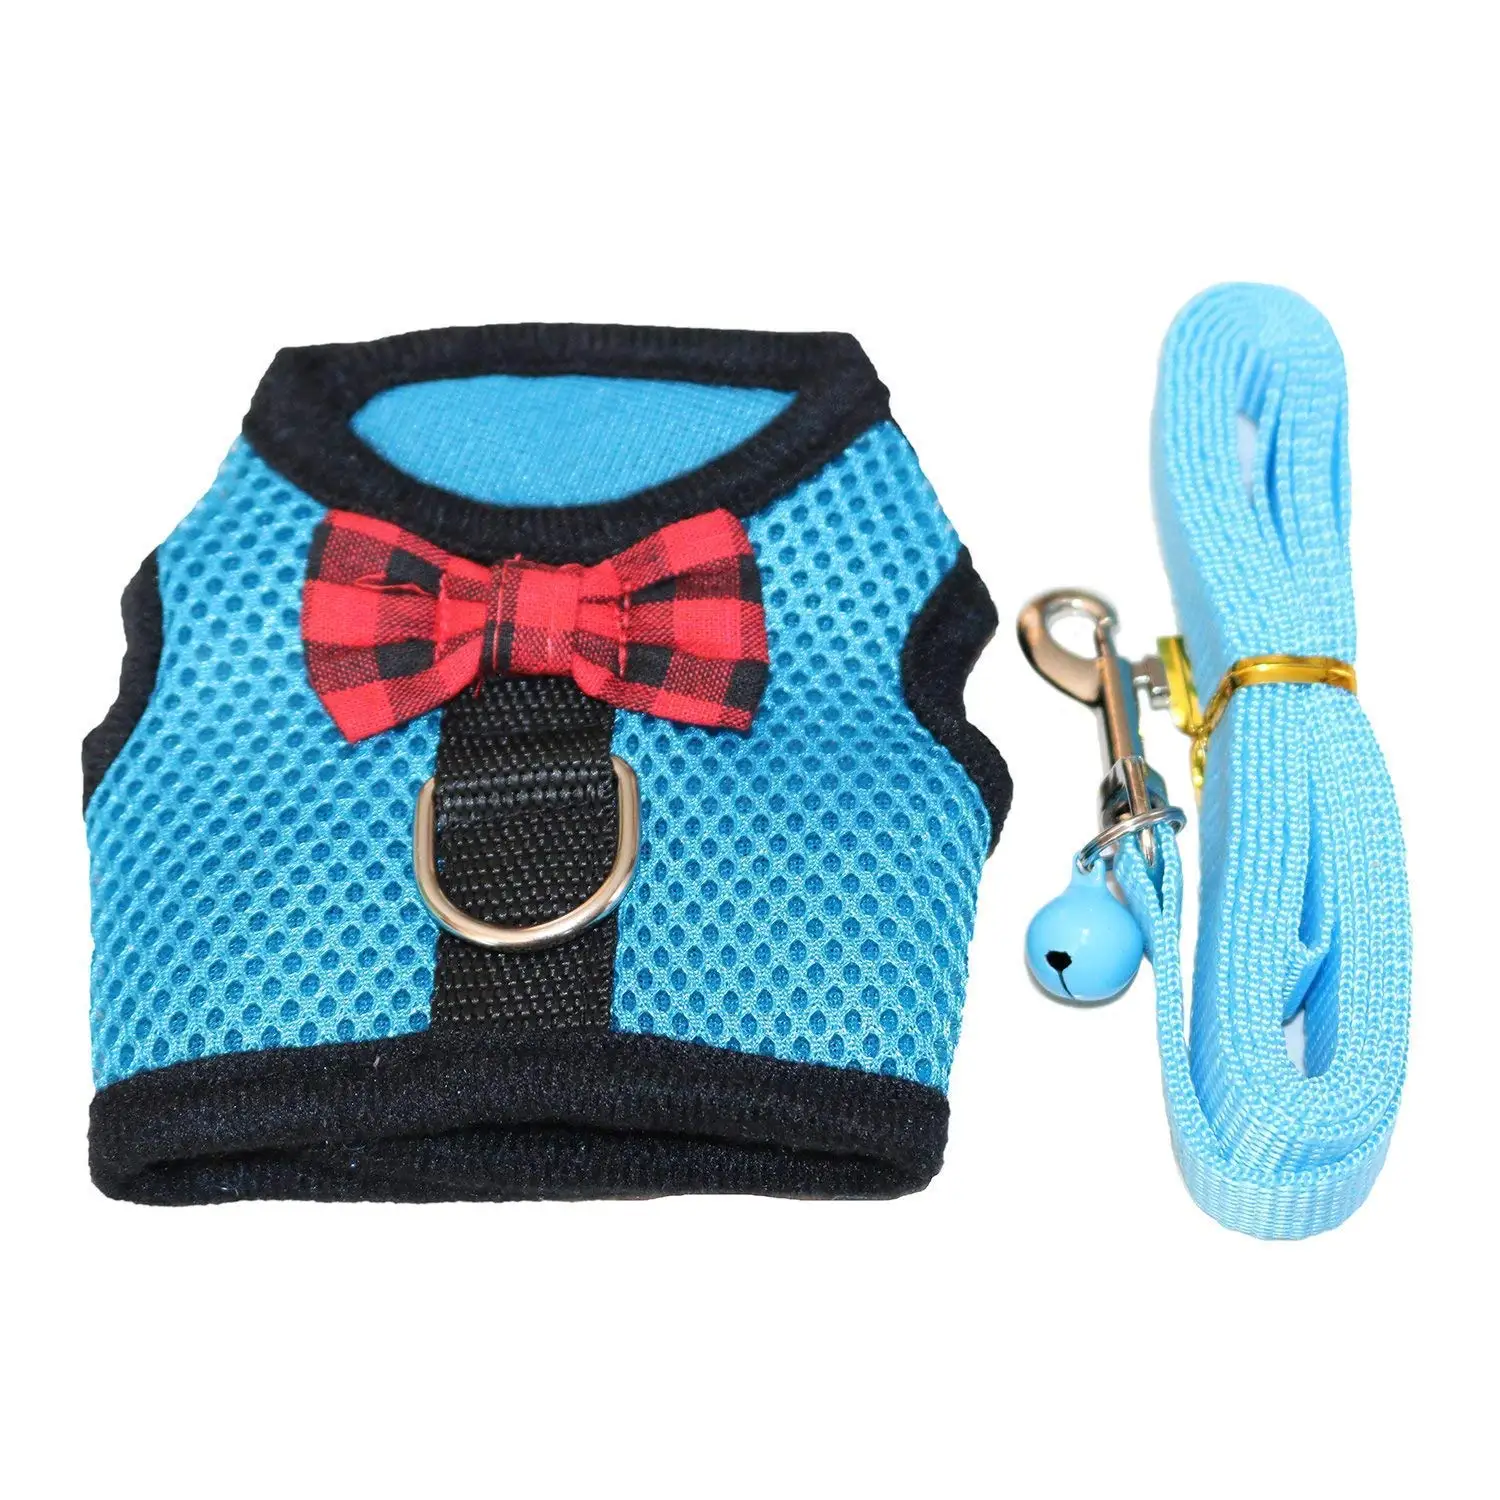 Ferret Filhome Small Pet Harness Vest and Leash Set with Bowknot and Bell Decor Chest Strap Harness Adjustable Soft Breathable for Outdoor Walking Guinea Pigs Chinchilla 